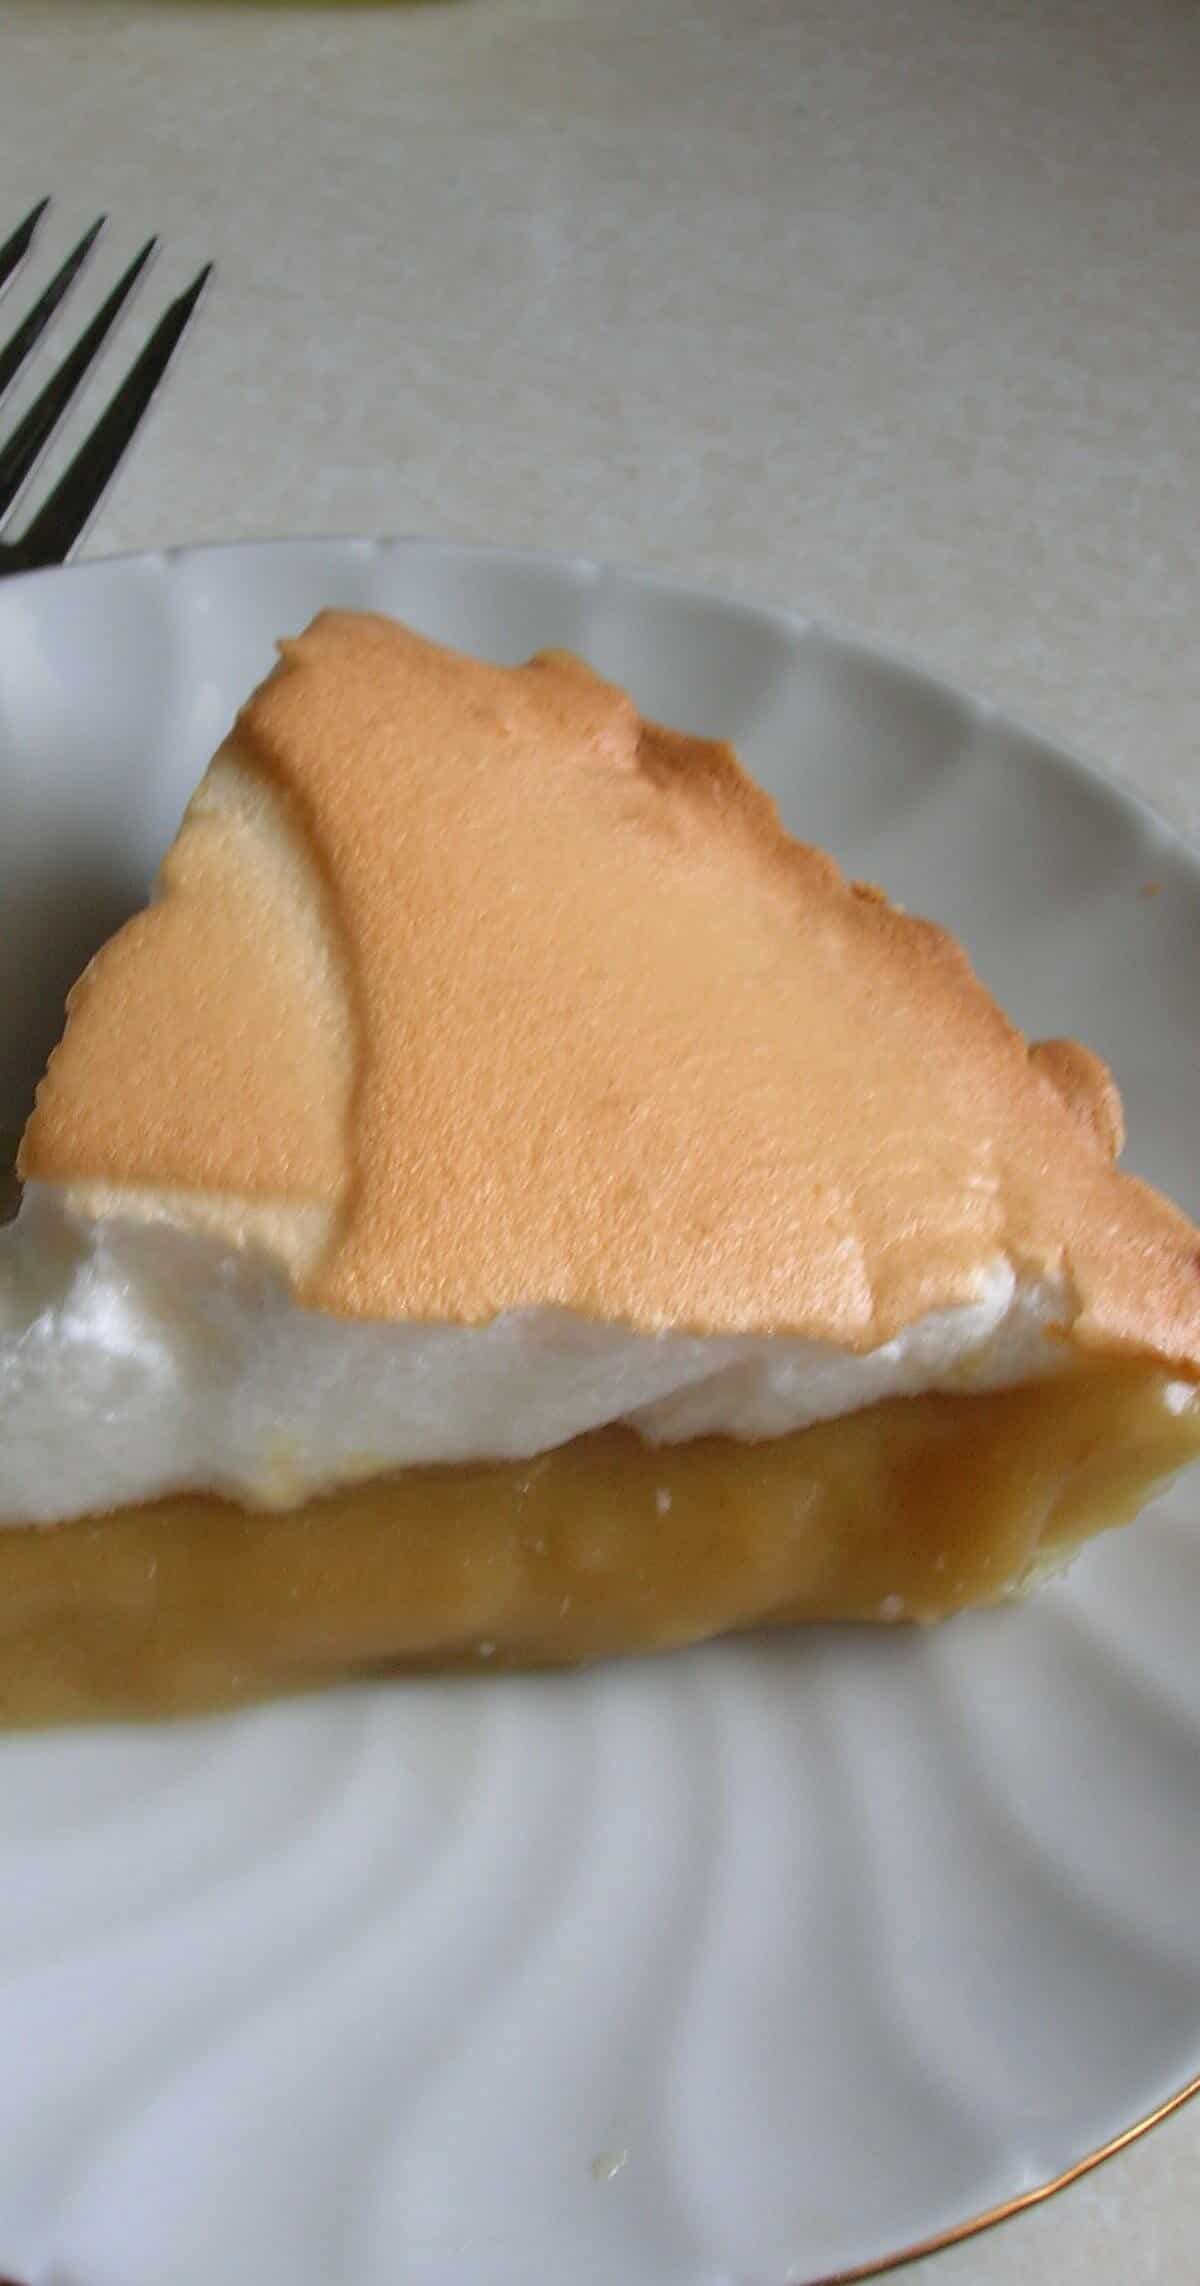  Let the sweetness of butterscotch melt in your mouth with this delightful pie!